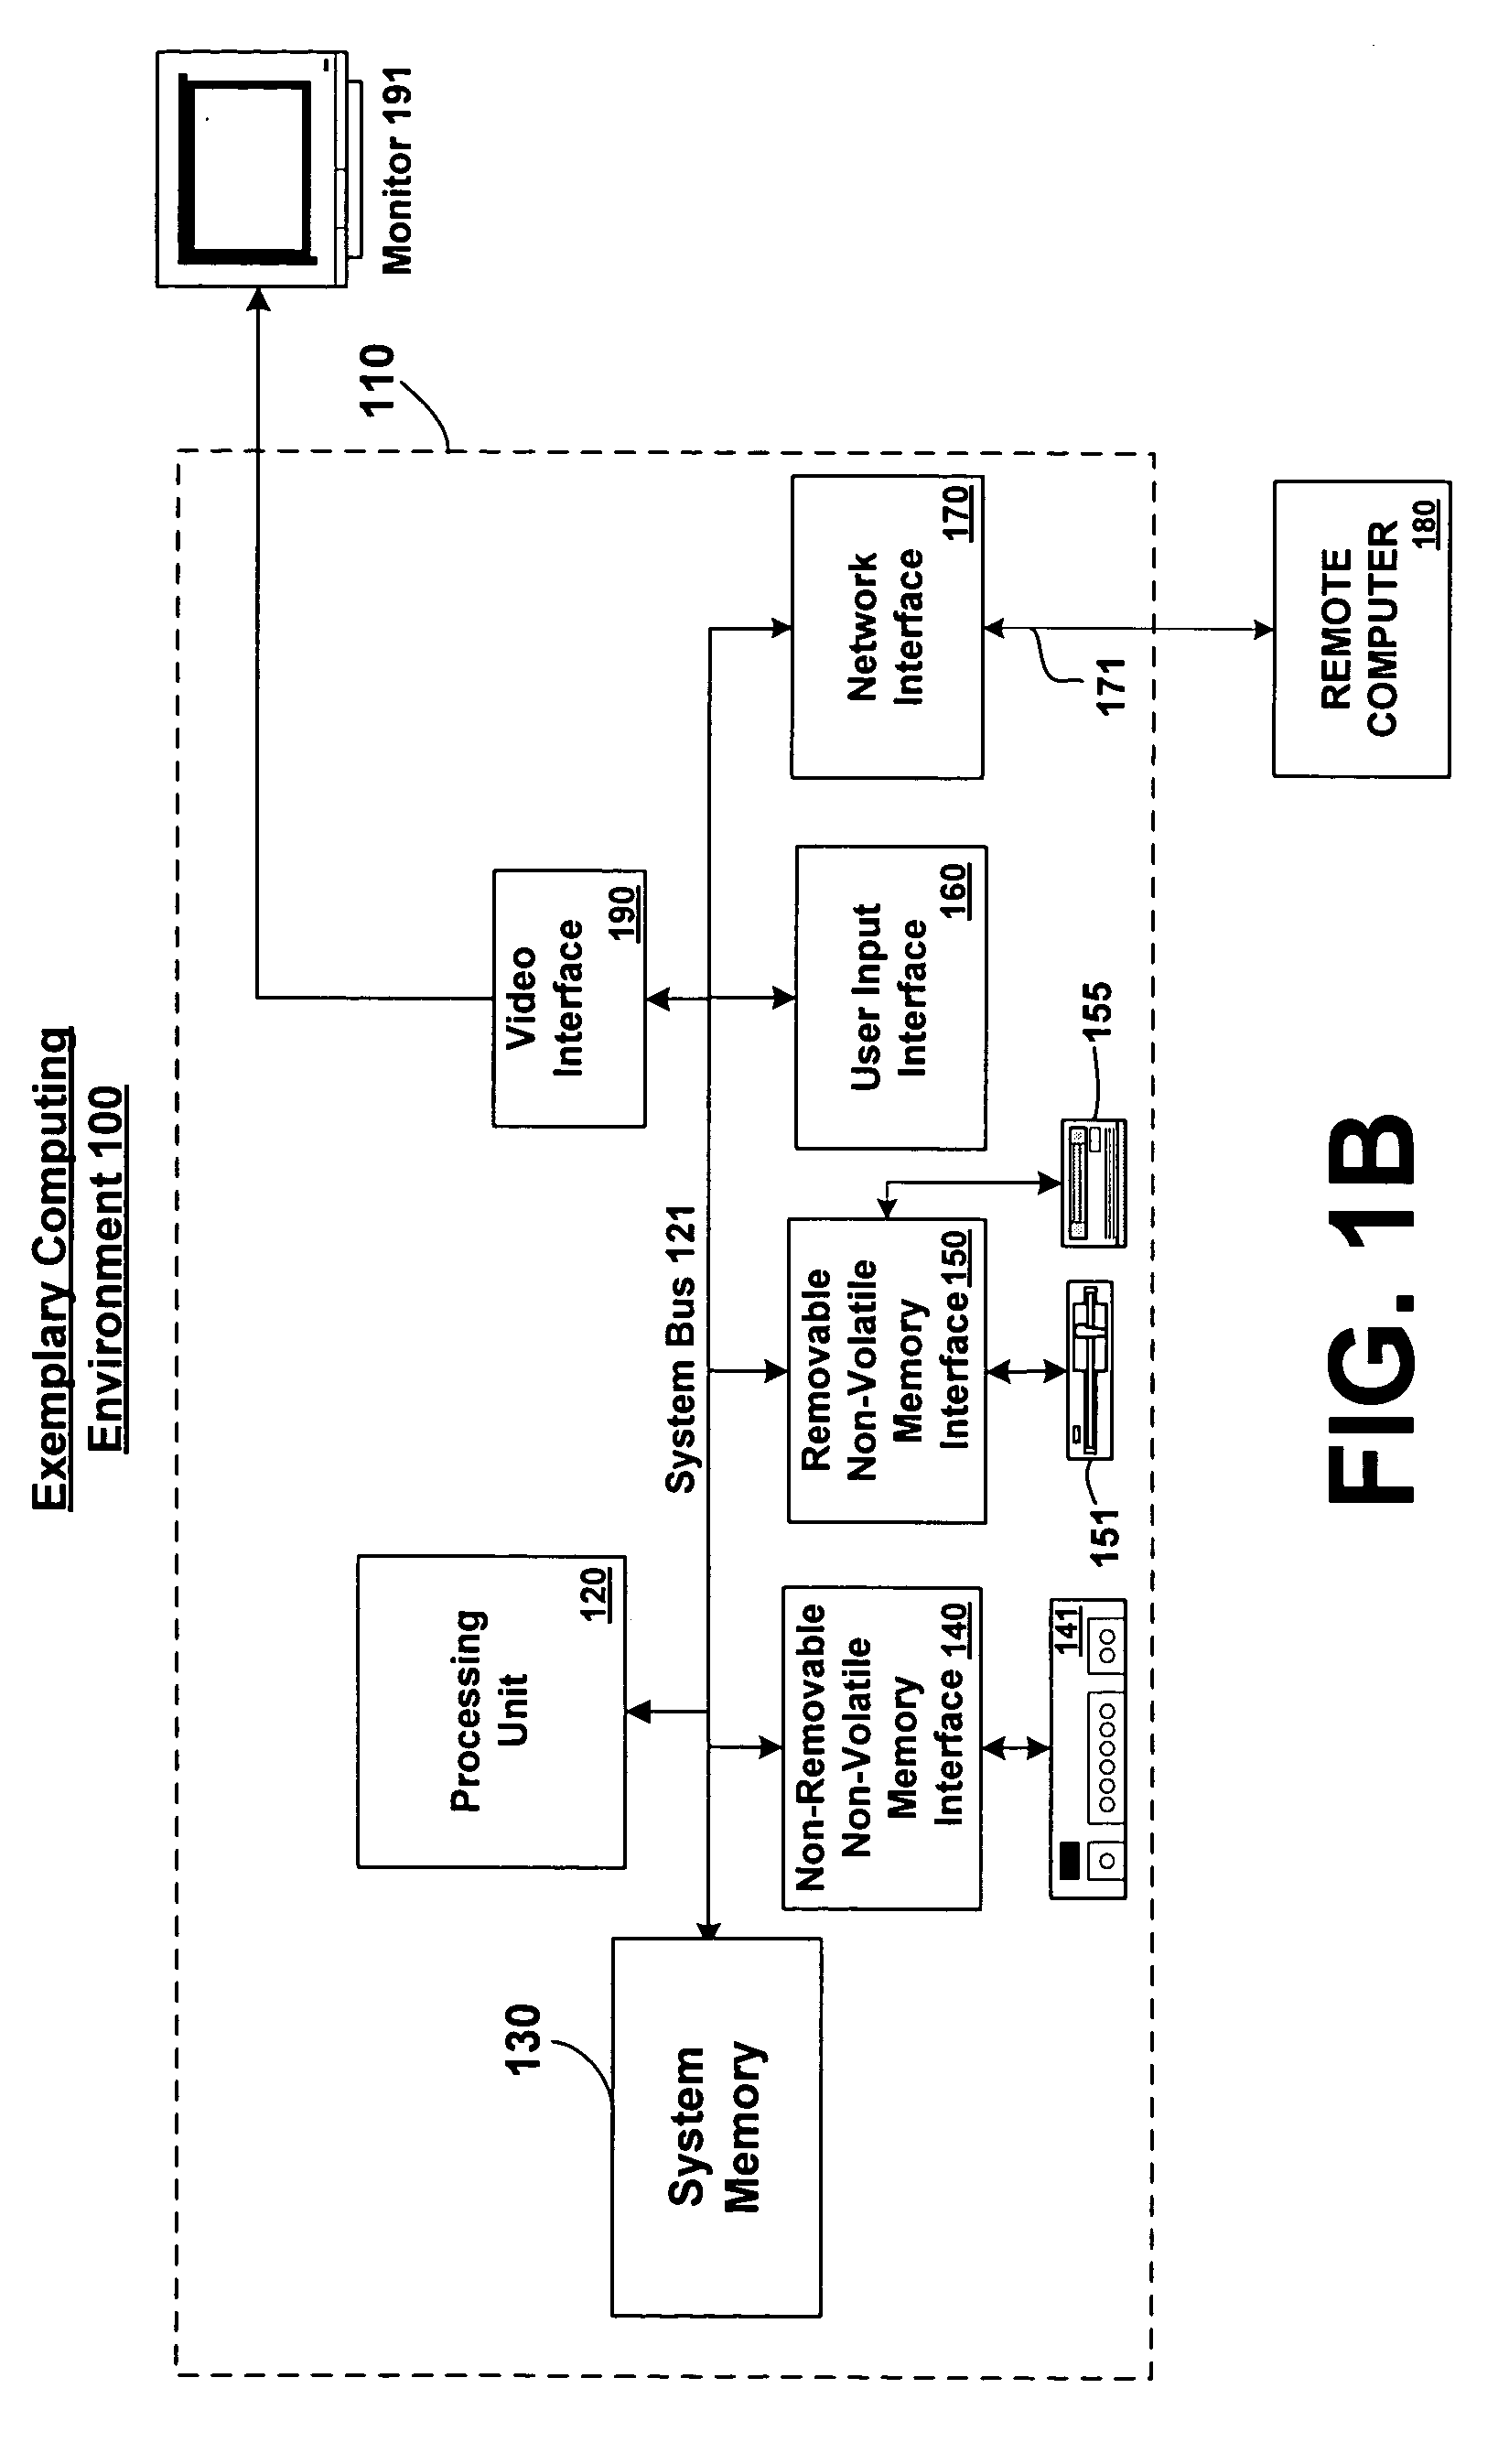 Systems and methods for updating query results based on query deltas